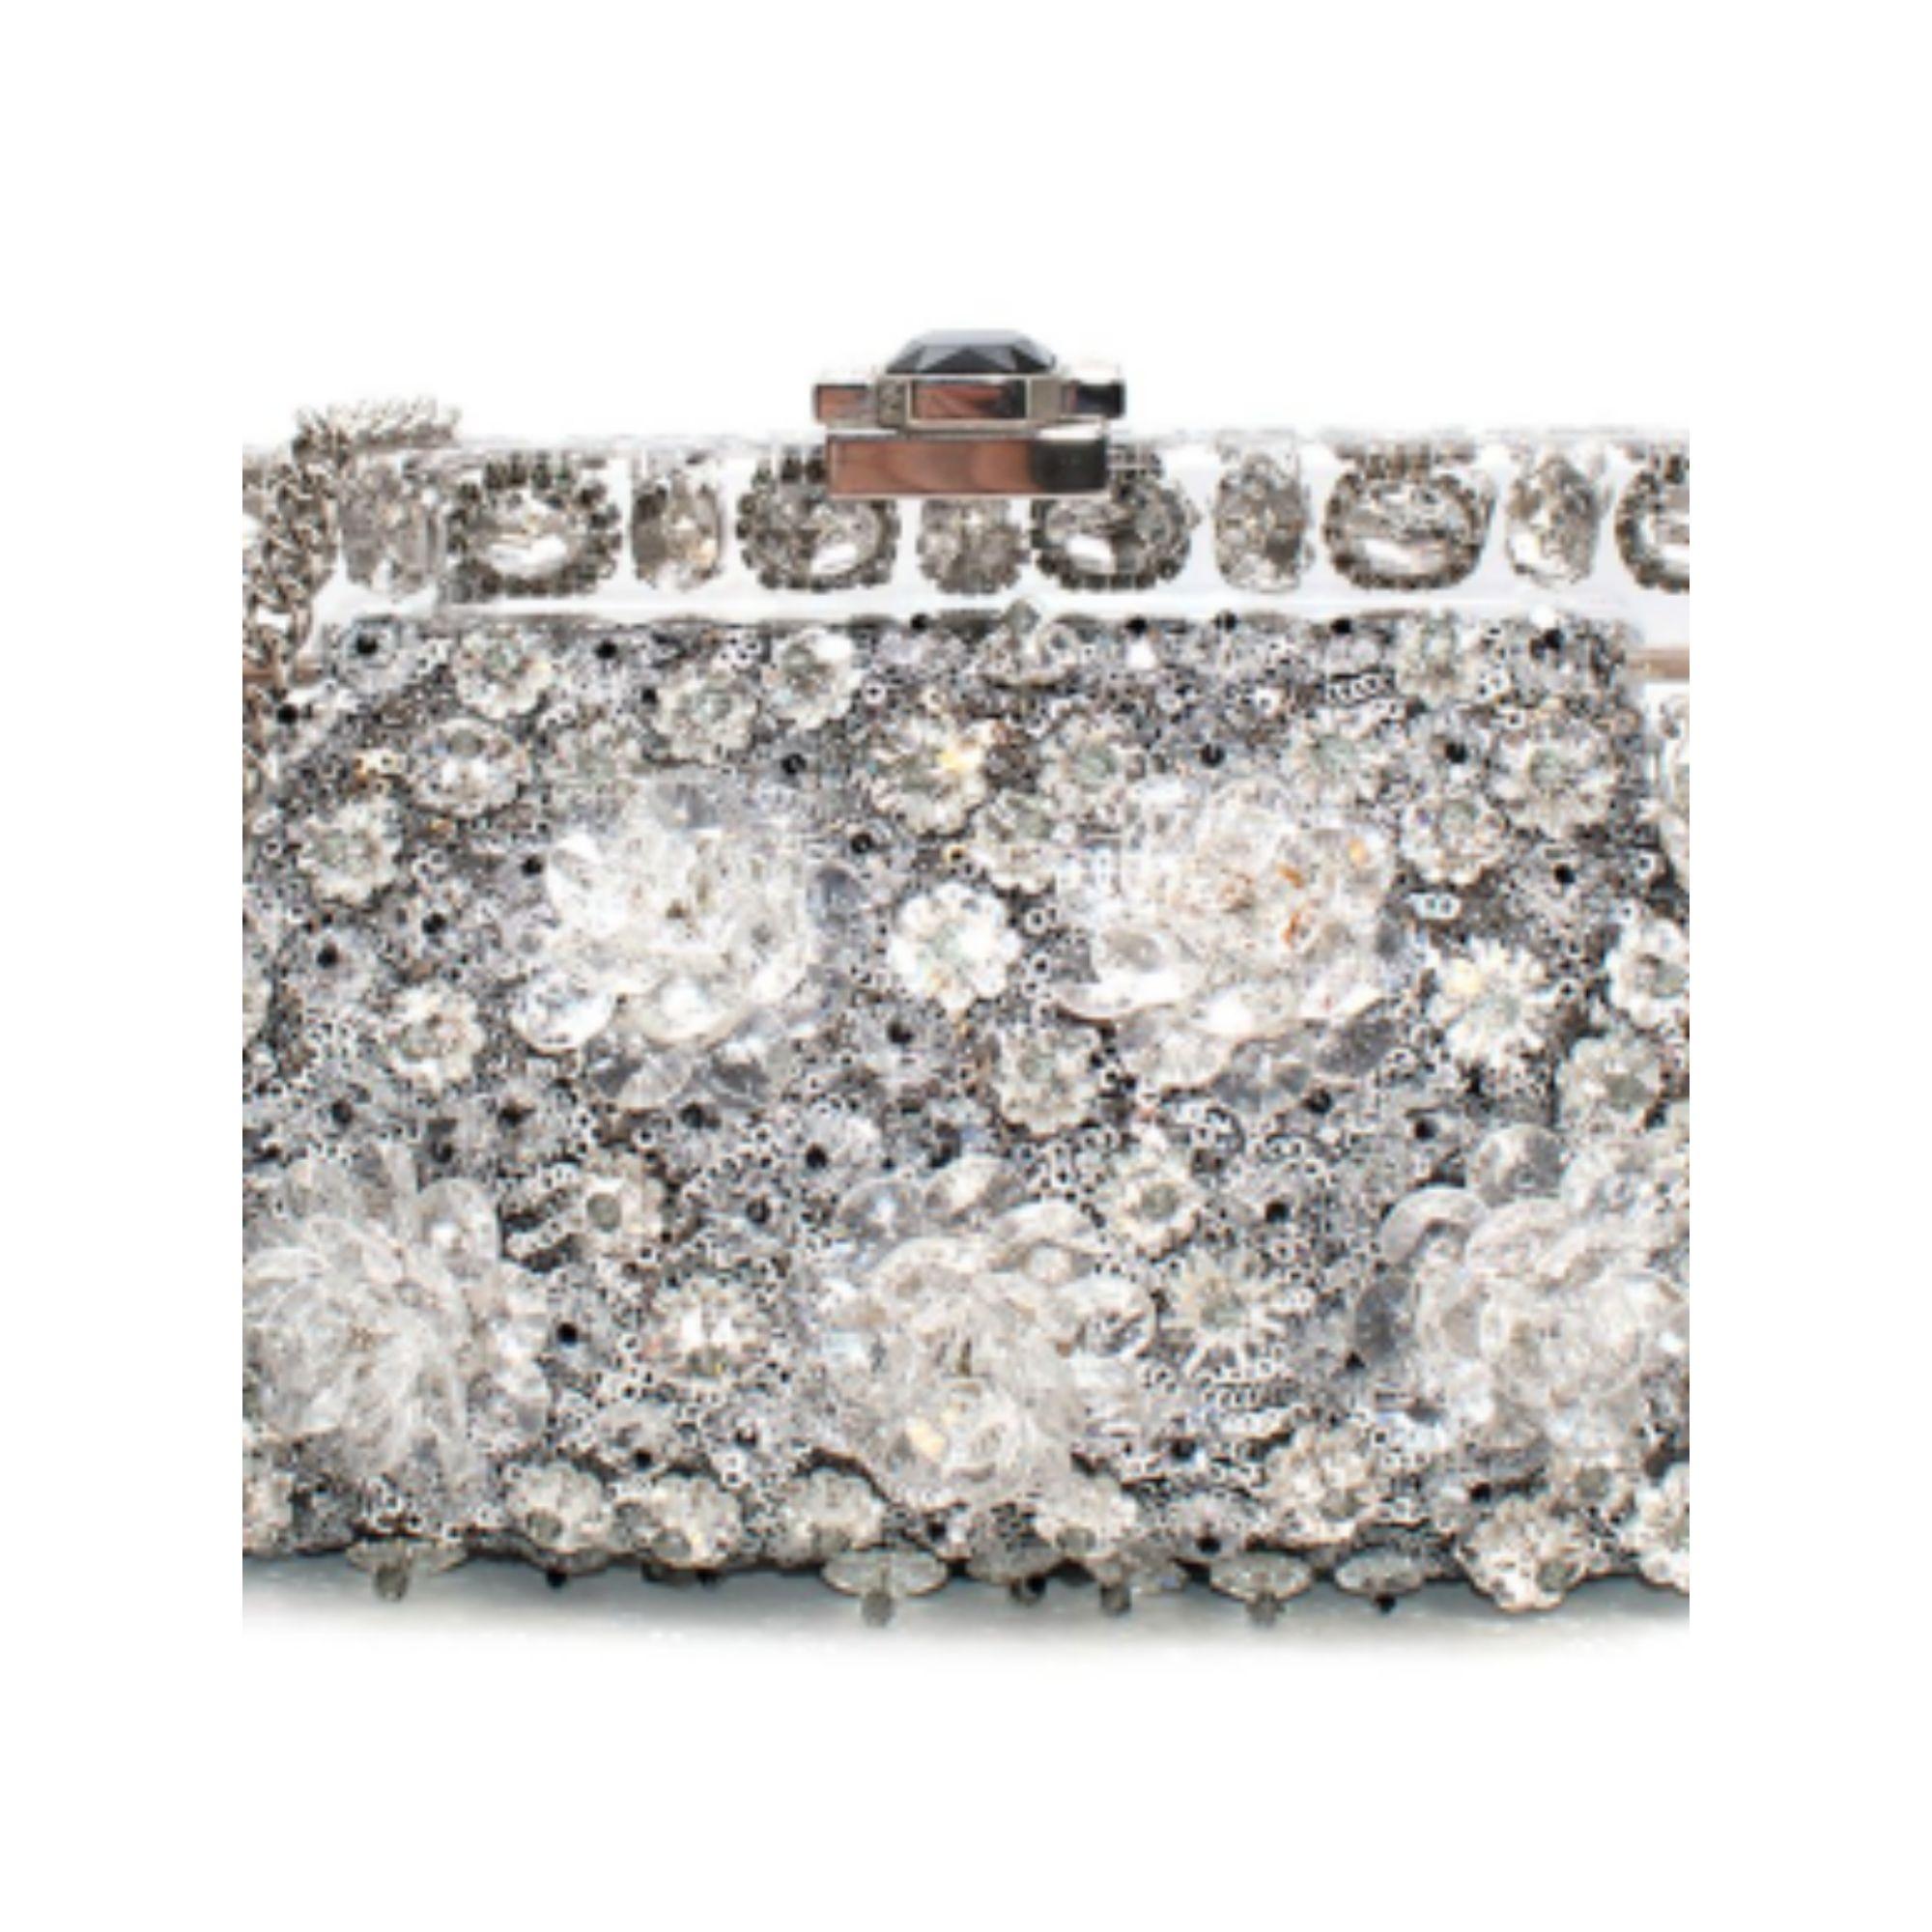 Dolce & Gabbana Vanda small embellished clutch

- Magnetic clasp fastening
- Thin shoulder chain
- Sequinned body with crystal flower detailing
- One main compartment with slip pocket
- Satin lining

Material
PVC and satin

Made in Italy

PLEASE